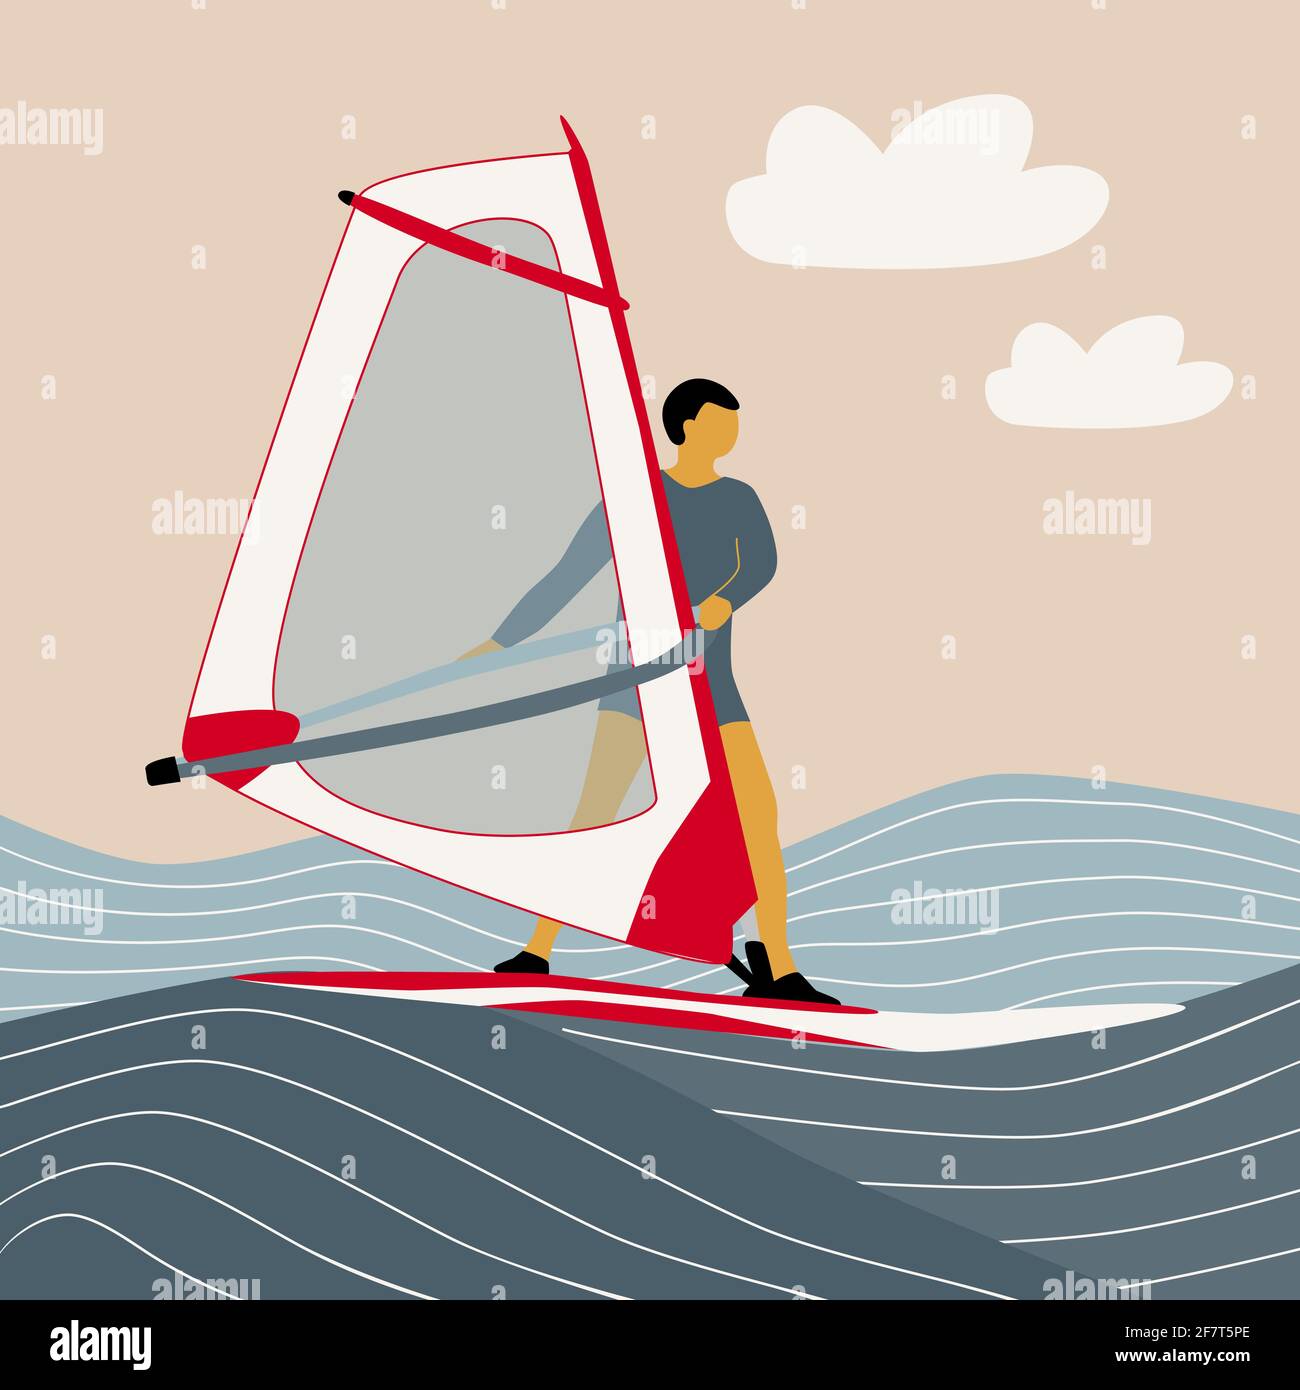 Hand draw vector illustration man on windsurf, abstract sea and sky background, water sports, riding on waves, summer holidays Stock Vector